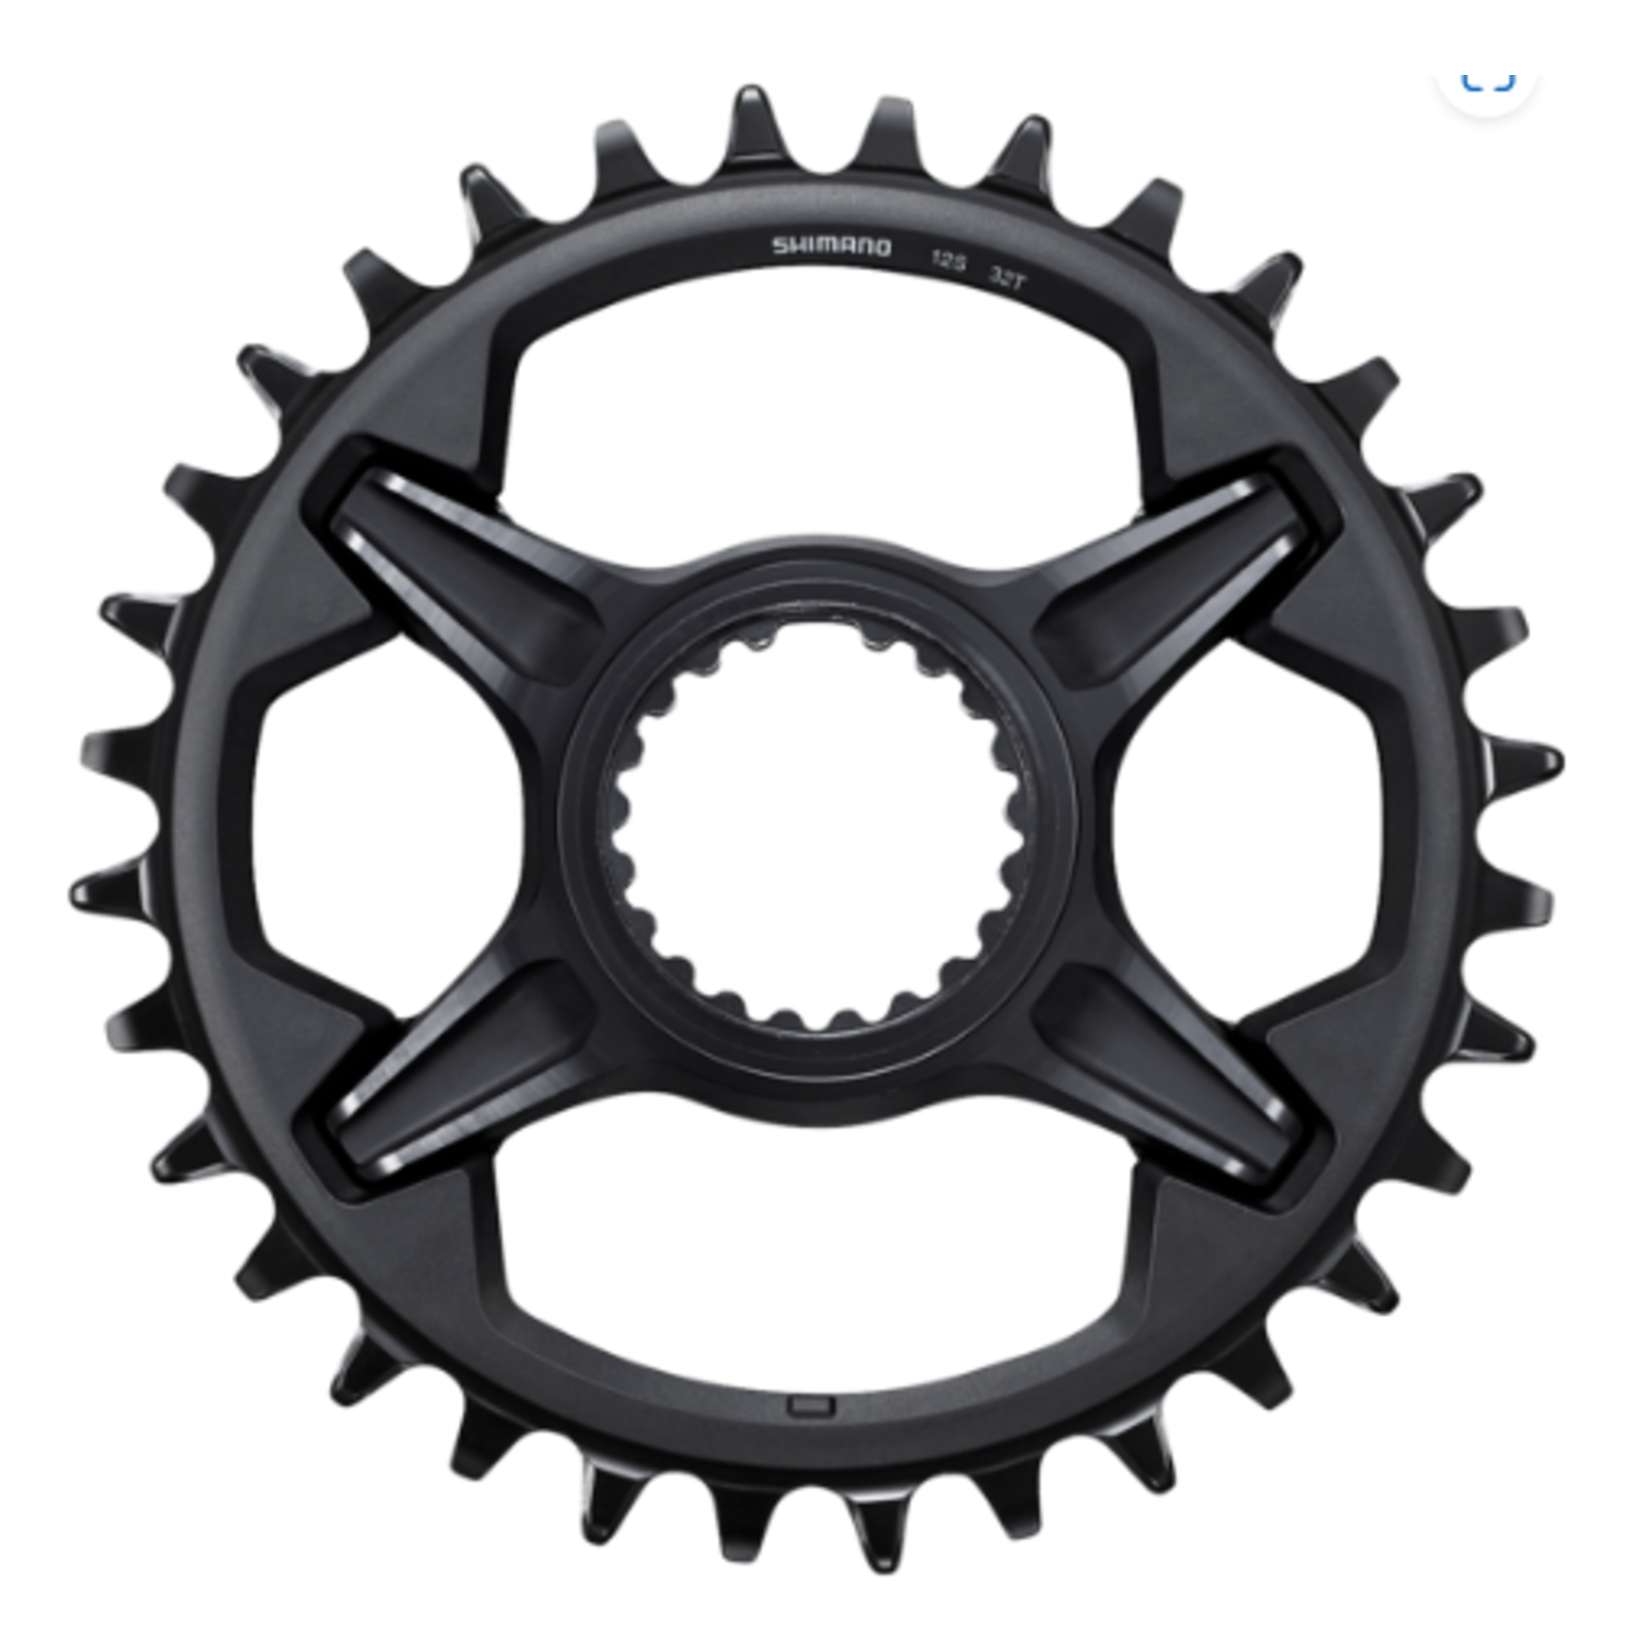 Shimano Shimano XT SM-CRM85 34t 1x Chainring for M8100 and M8130 Cranks, Black